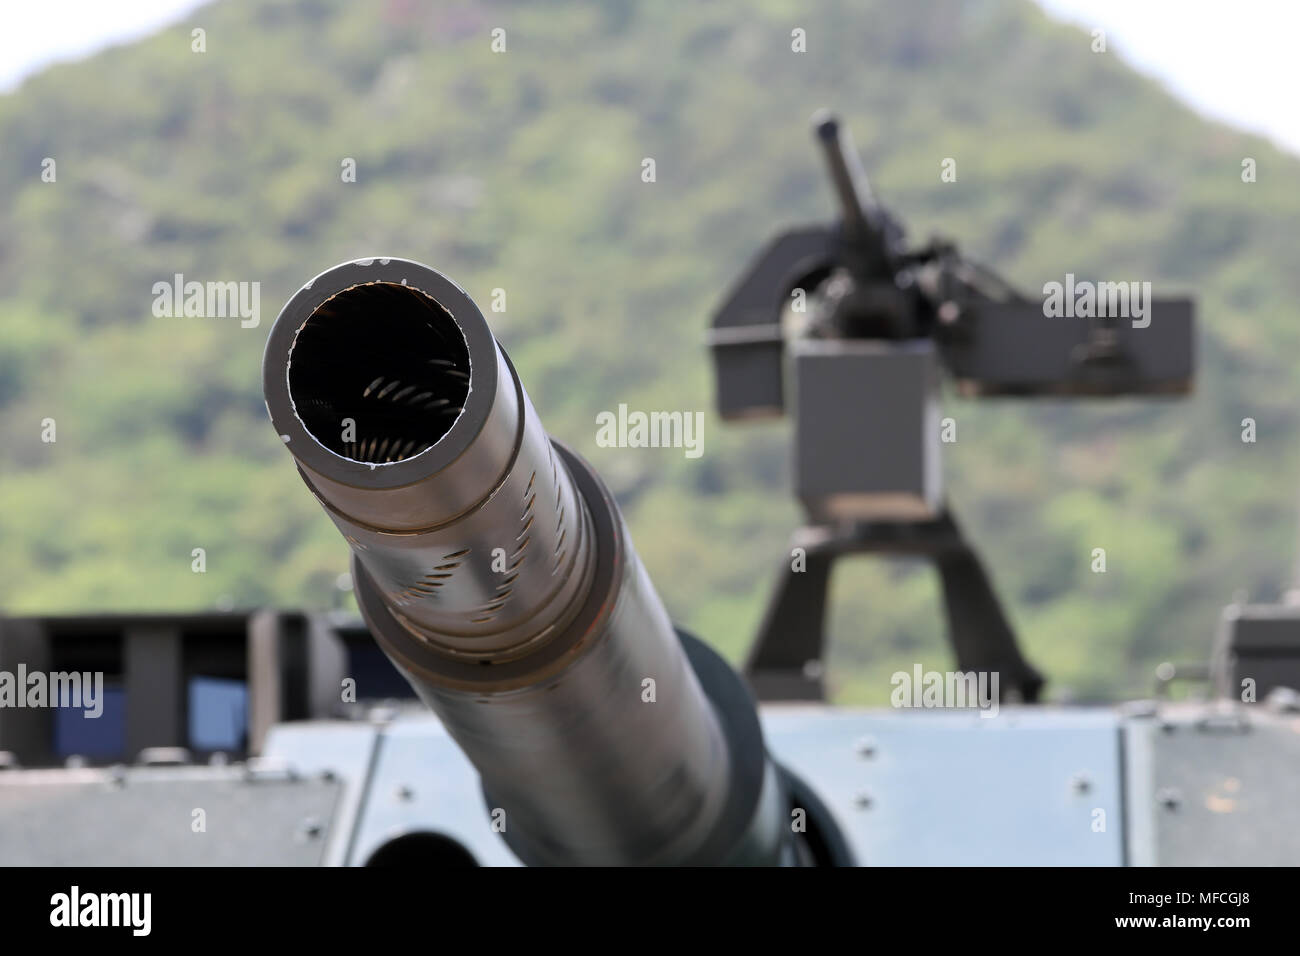 Japanese military cannon of tank with machine gun Stock Photo